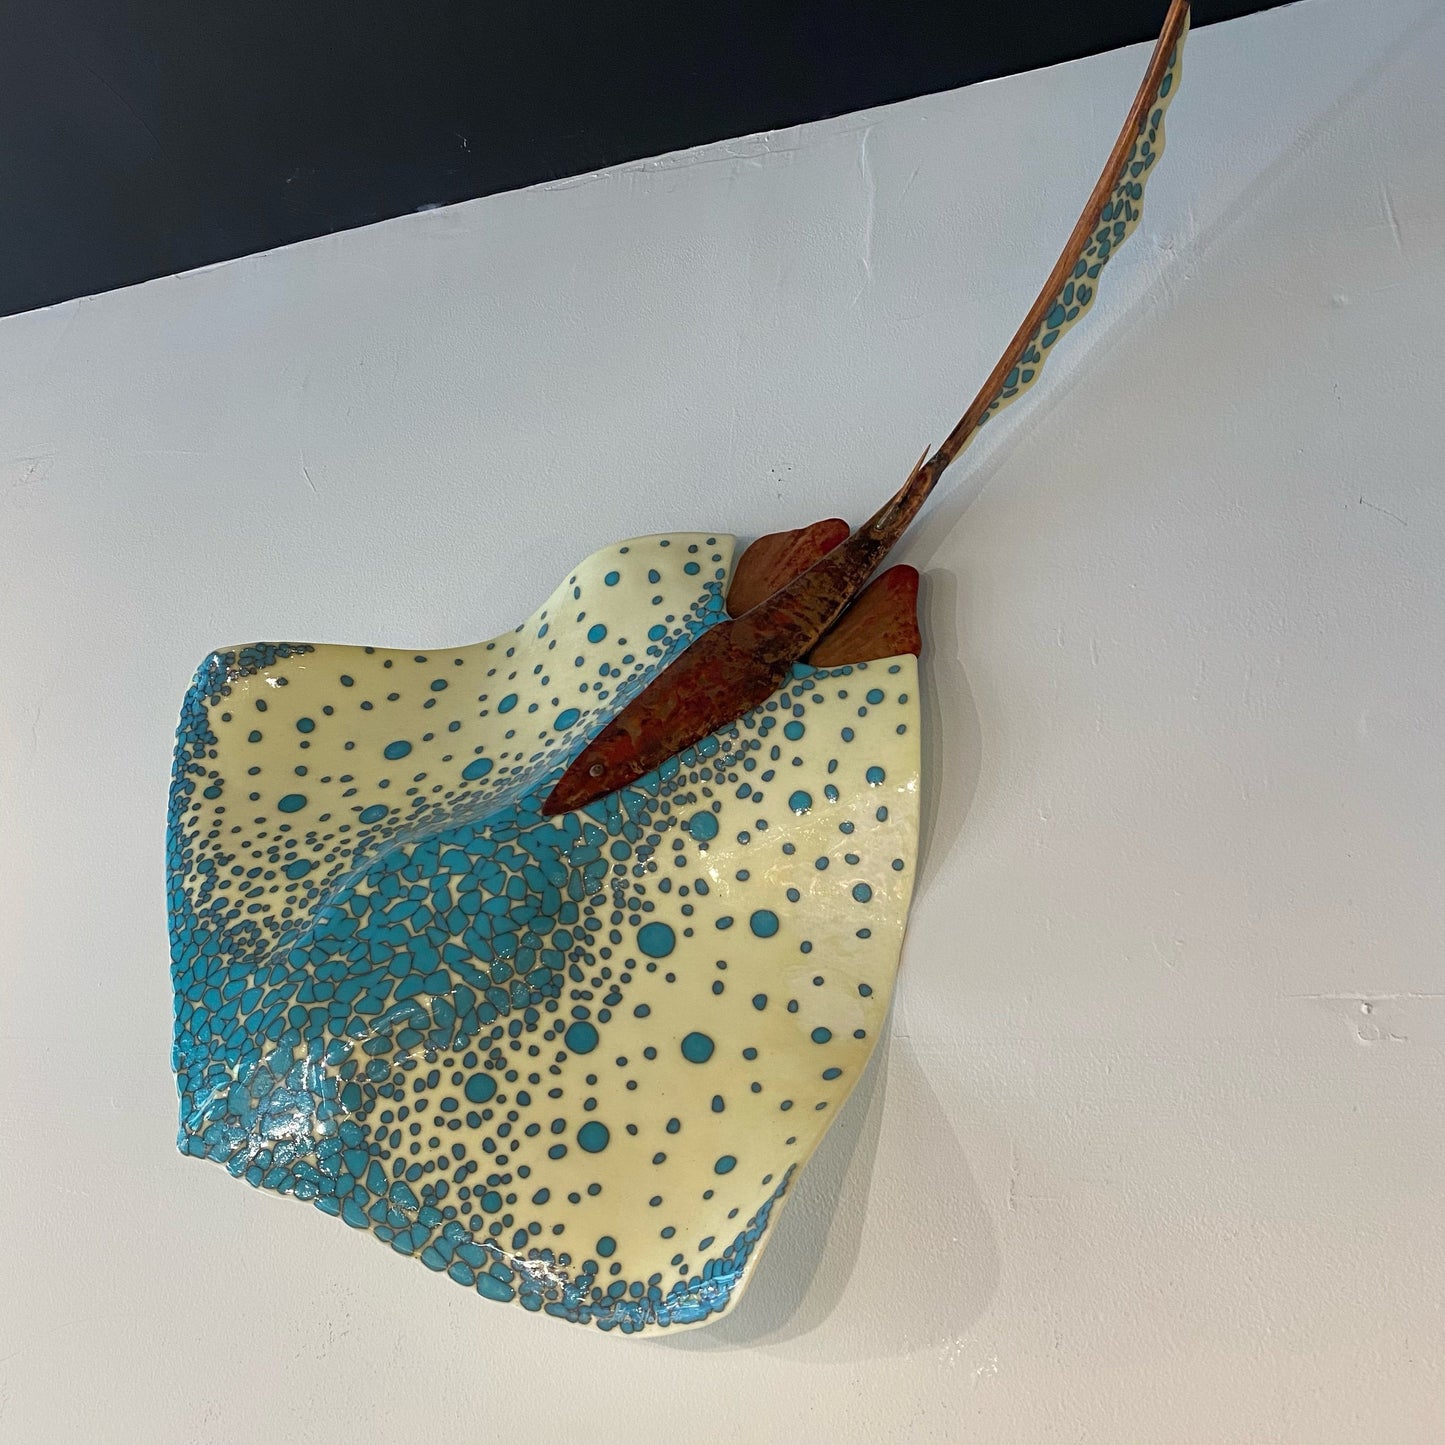 Large Stingray🎨 Glass🎨 Buy Art at Carolina Creations Gallery in Downtown New Bern🎨